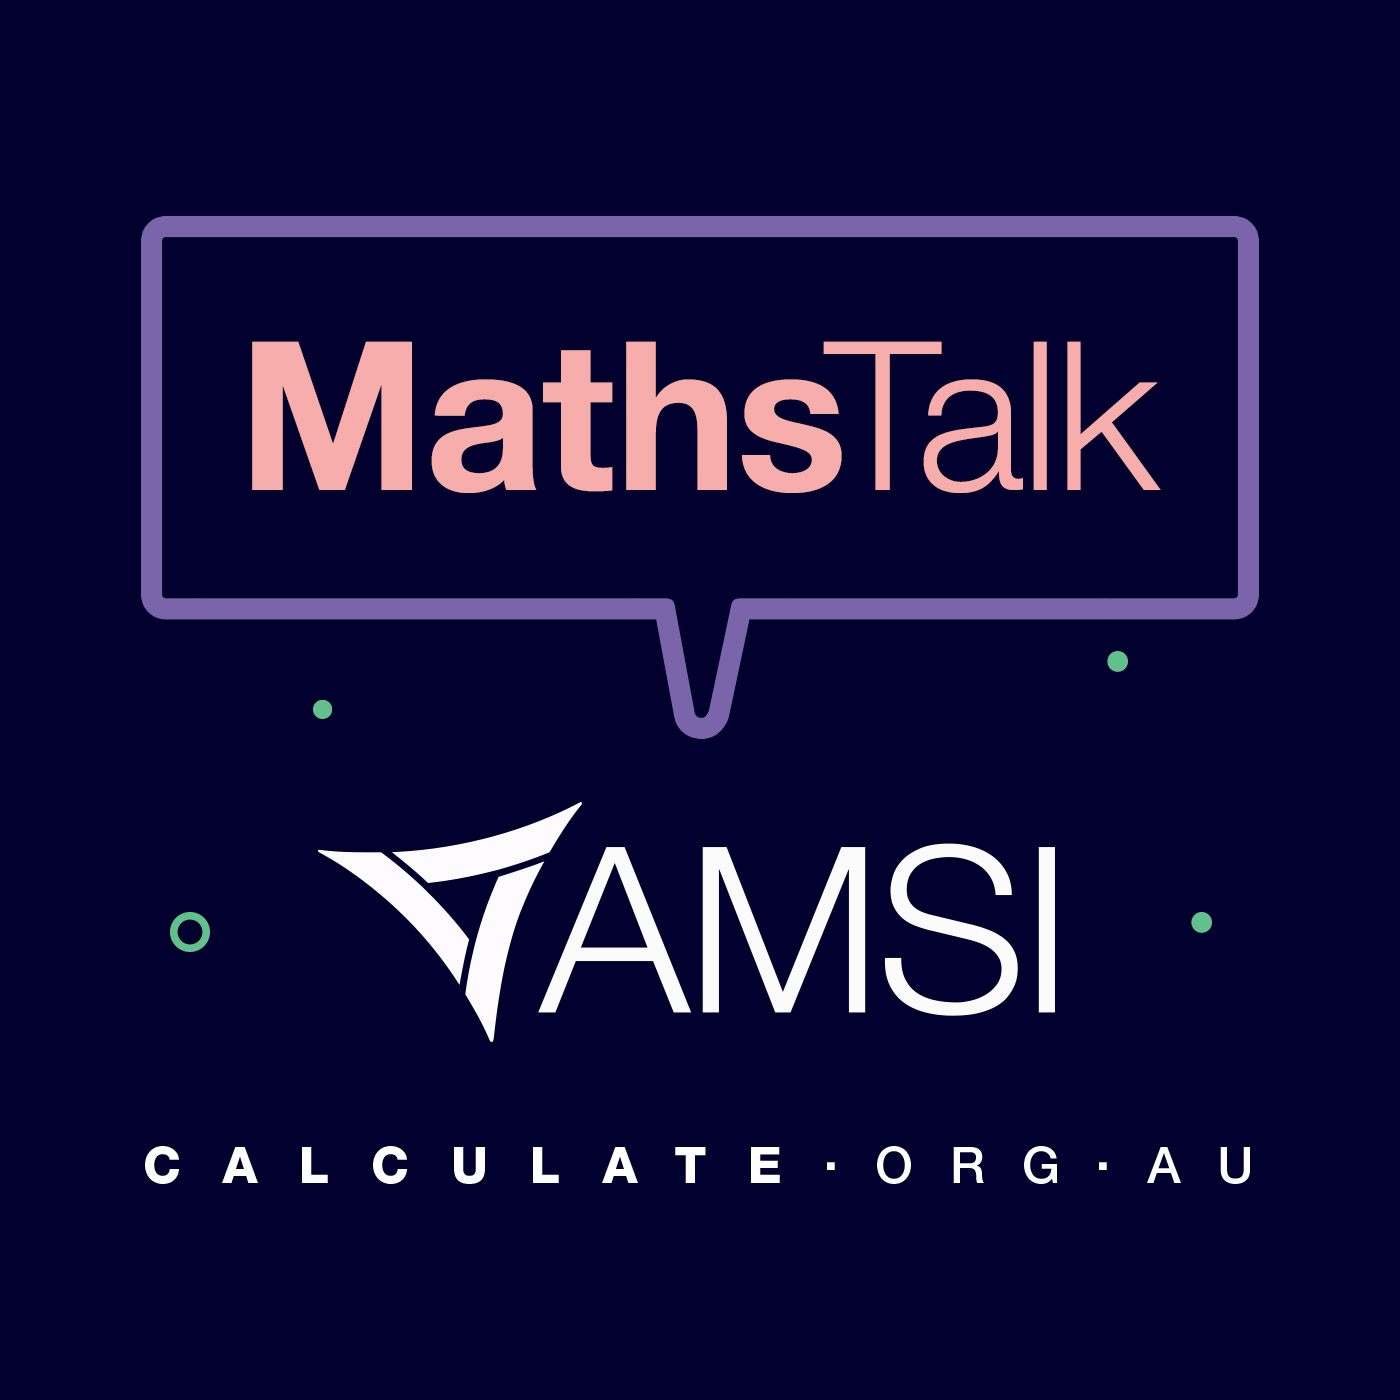 Twitter for Maths Education